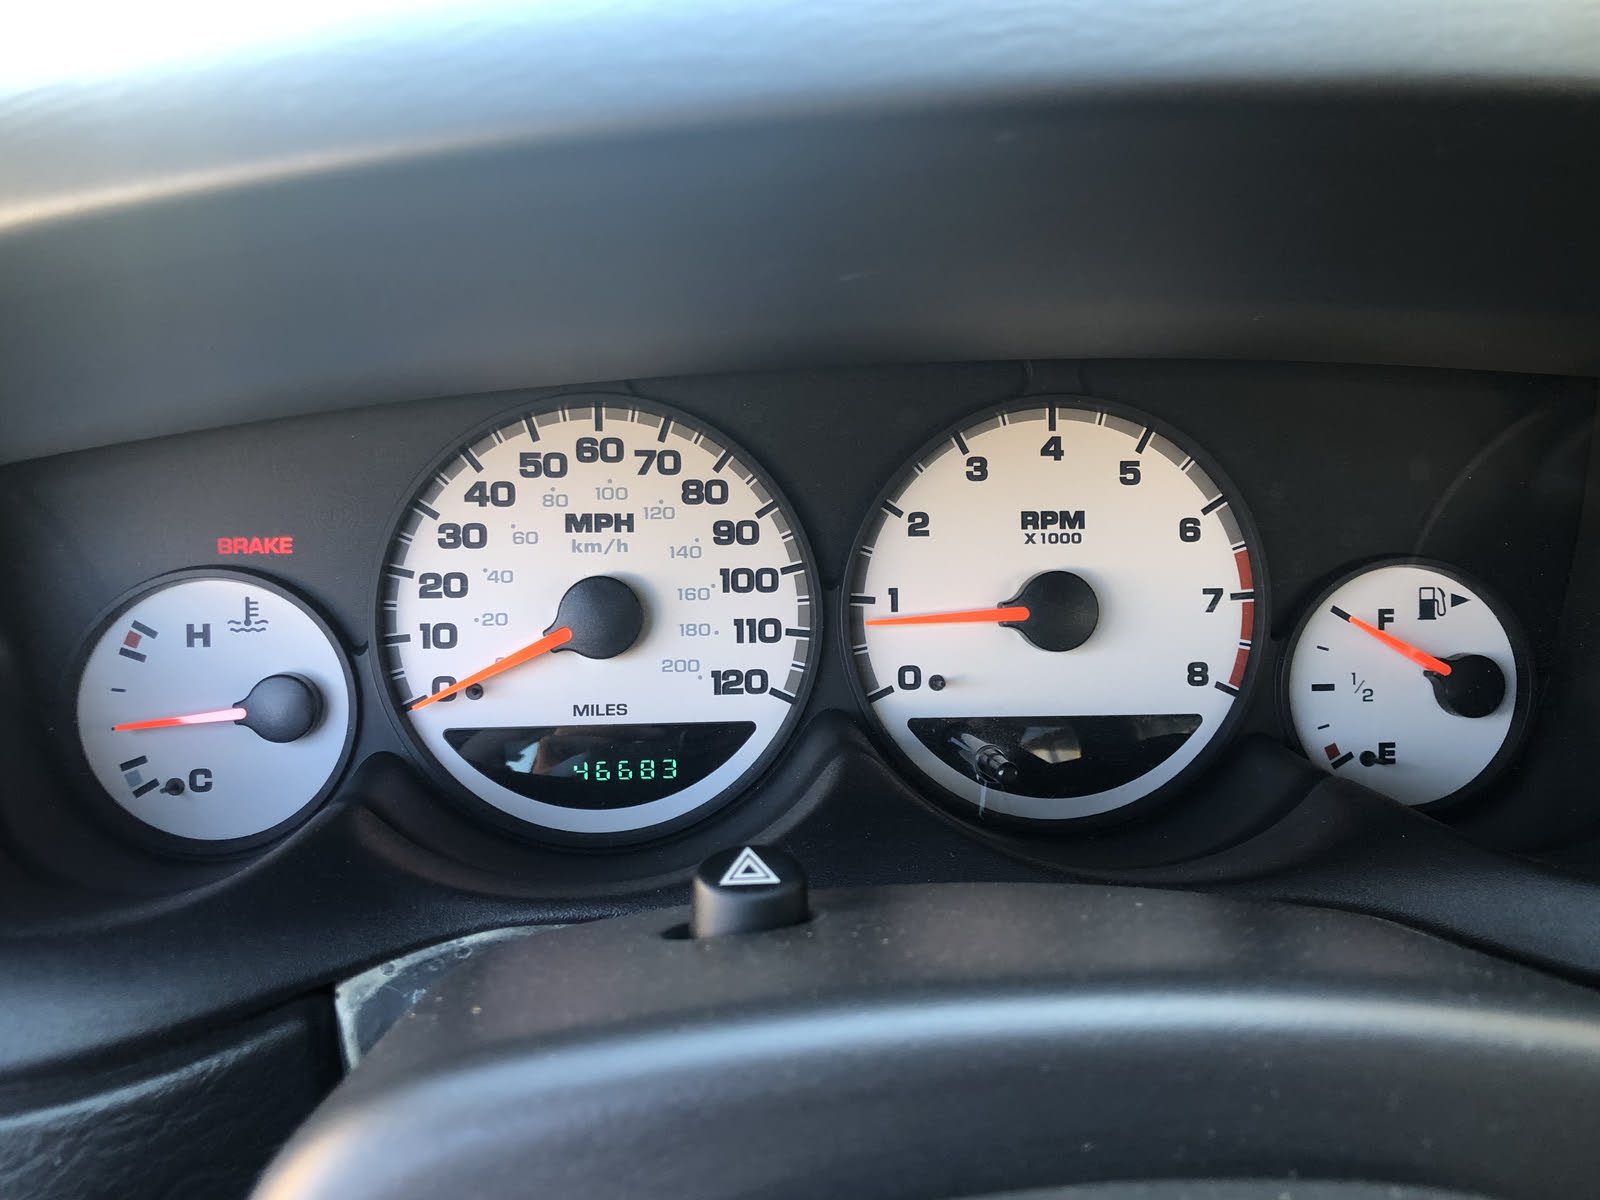 Dodge Neon Questions - Help Troubleshooting 2005 Dodge Neon rough idle